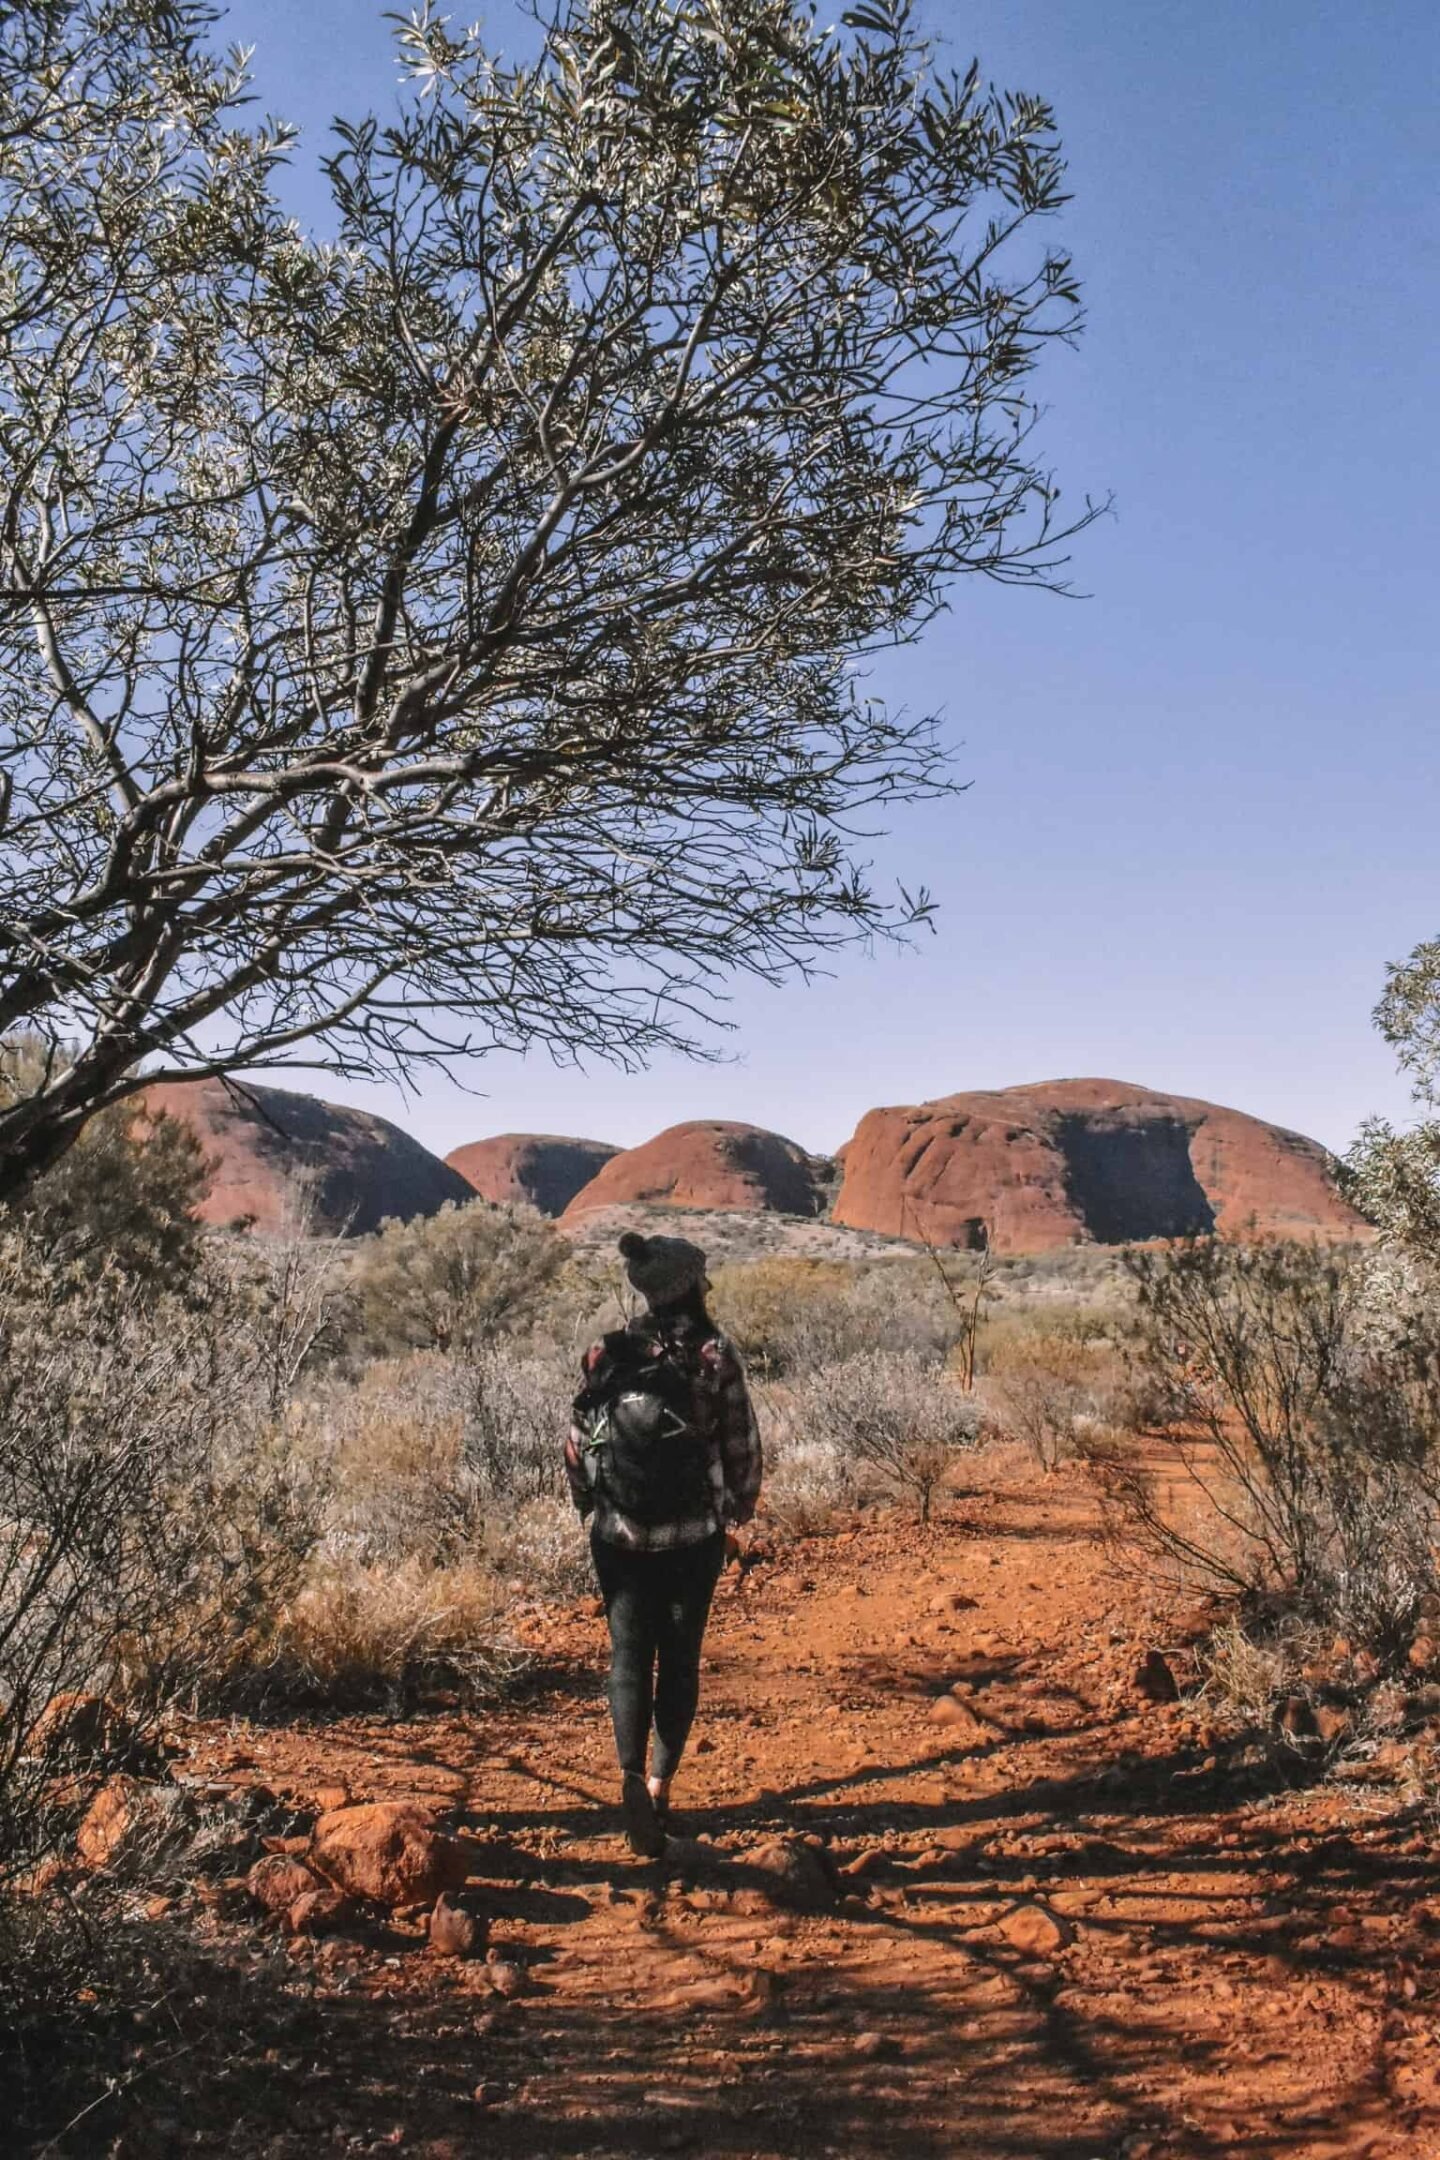 Looking for the perfect tour of Uluru and surroundings? You found it! Find out the best itinerary with the Rock Tours and information about Uluru, Kings Canyon, Kata Tjuta and surroundings. Everything you need to know about the perfect Red Centre itinerary.